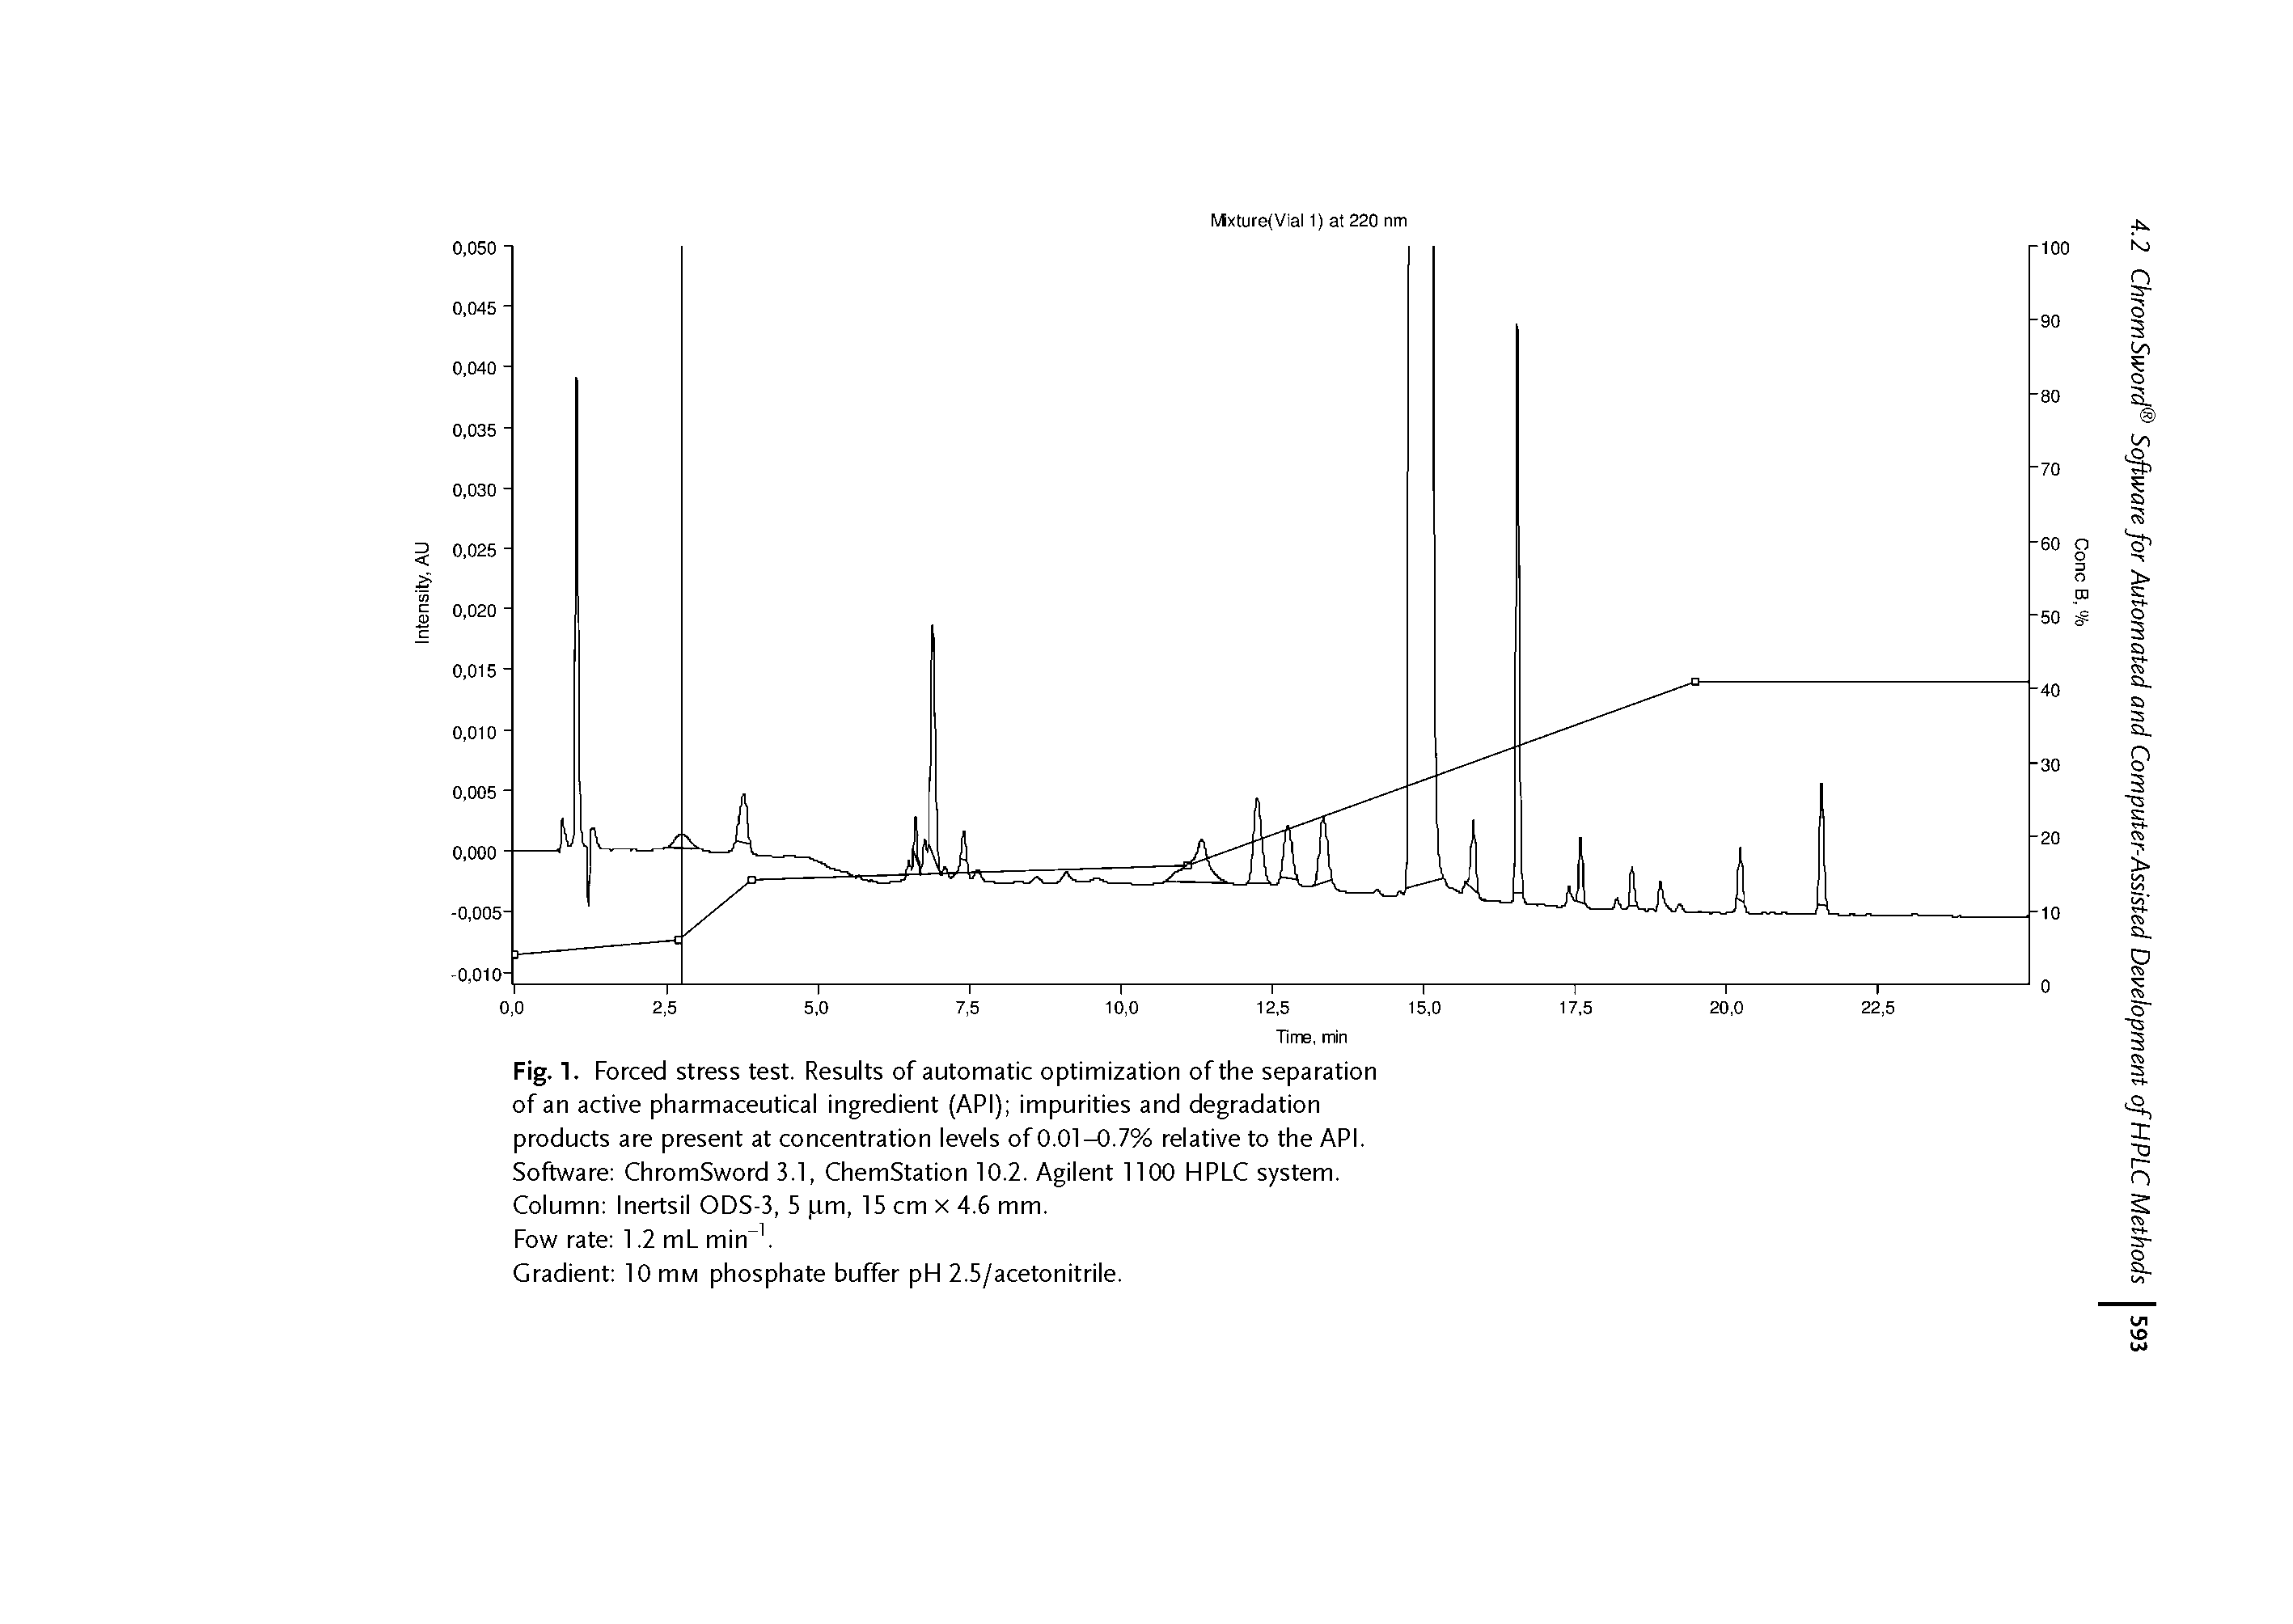 Fig. 1. Forced stress test. Results of automatic optimization of the separation of an active pharmaceutical ingredient (API) impurities and degradation products are present at concentration levels of 0.01-0.7% relative to the API. Software ChromSword 3.1, ChemStation 10.2. Agilent 1100 HPLC system. Column Inertsil ODS-3, 5 pm, 15 cm x 4.6 mm.